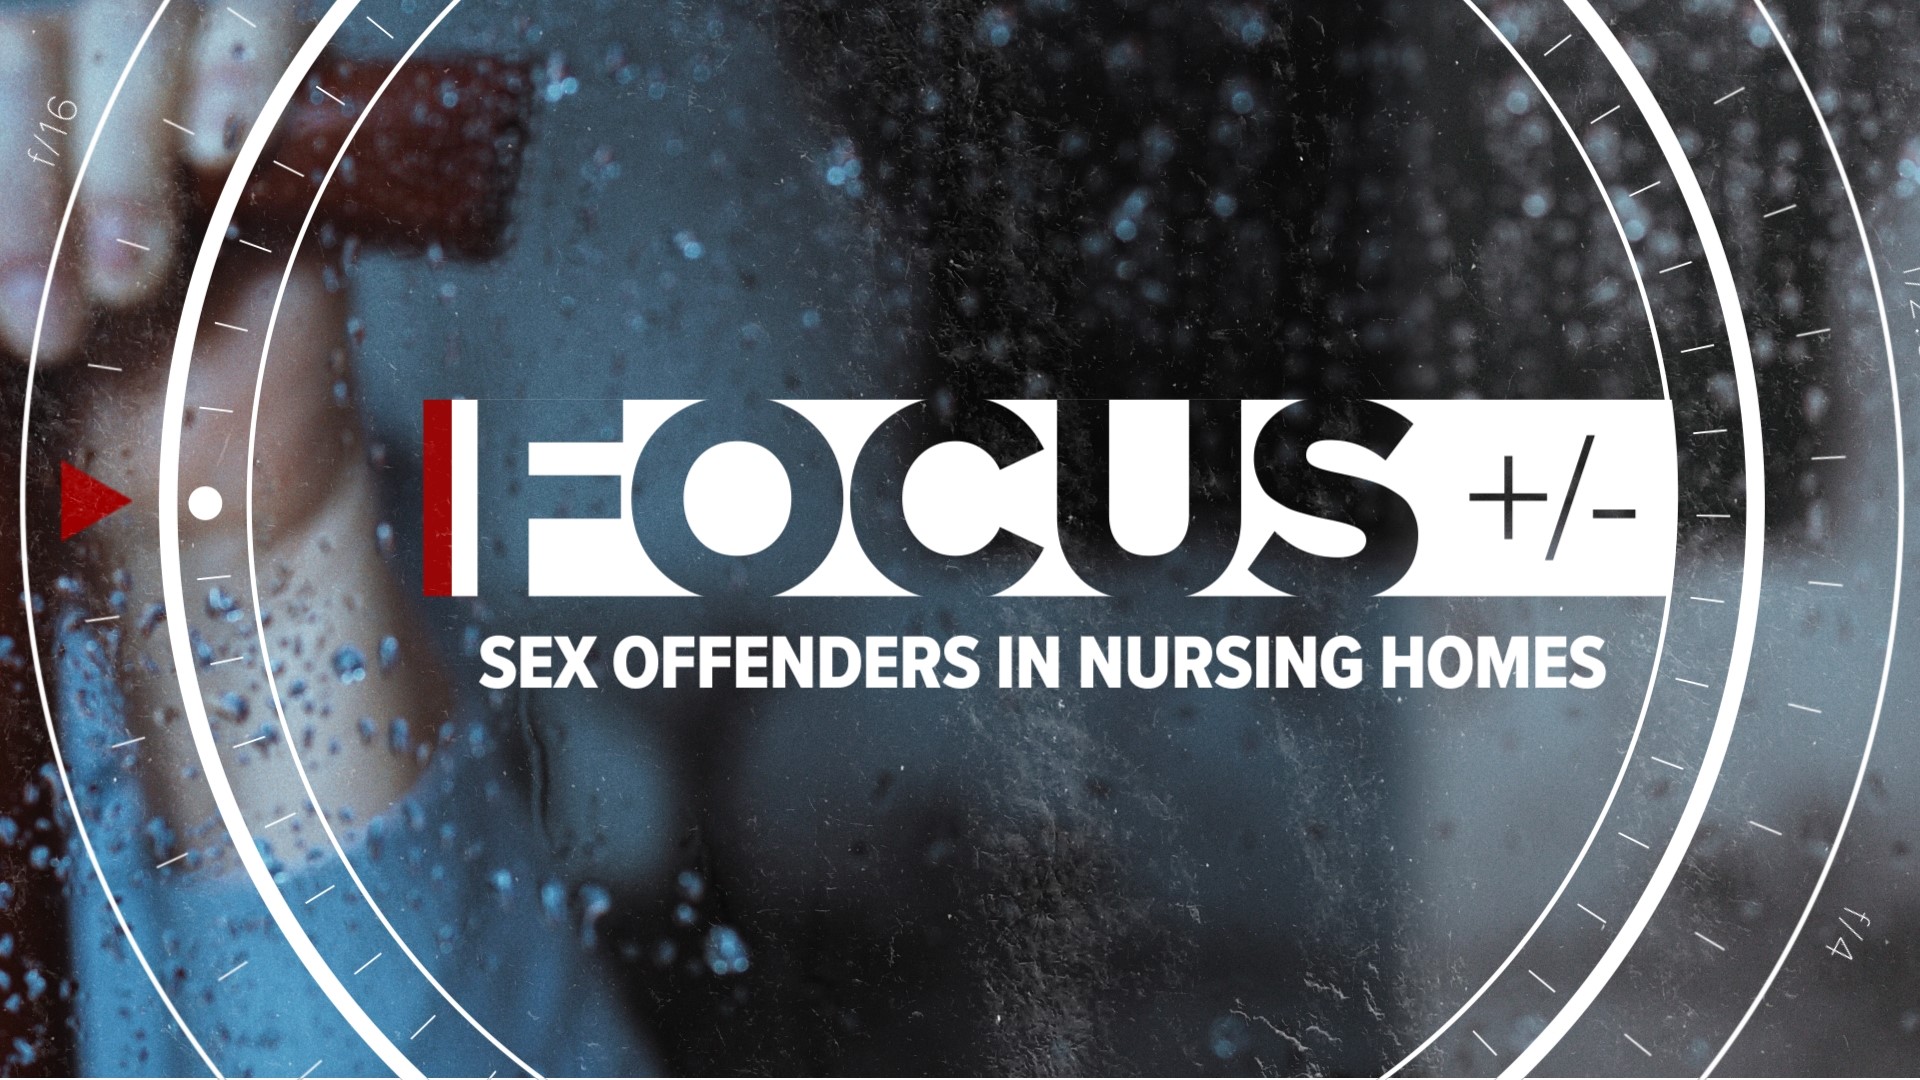 Our FOCUS team has found many elderly residents are living among registered sex offenders. If they don't do their homework, they likely wouldn't know it.